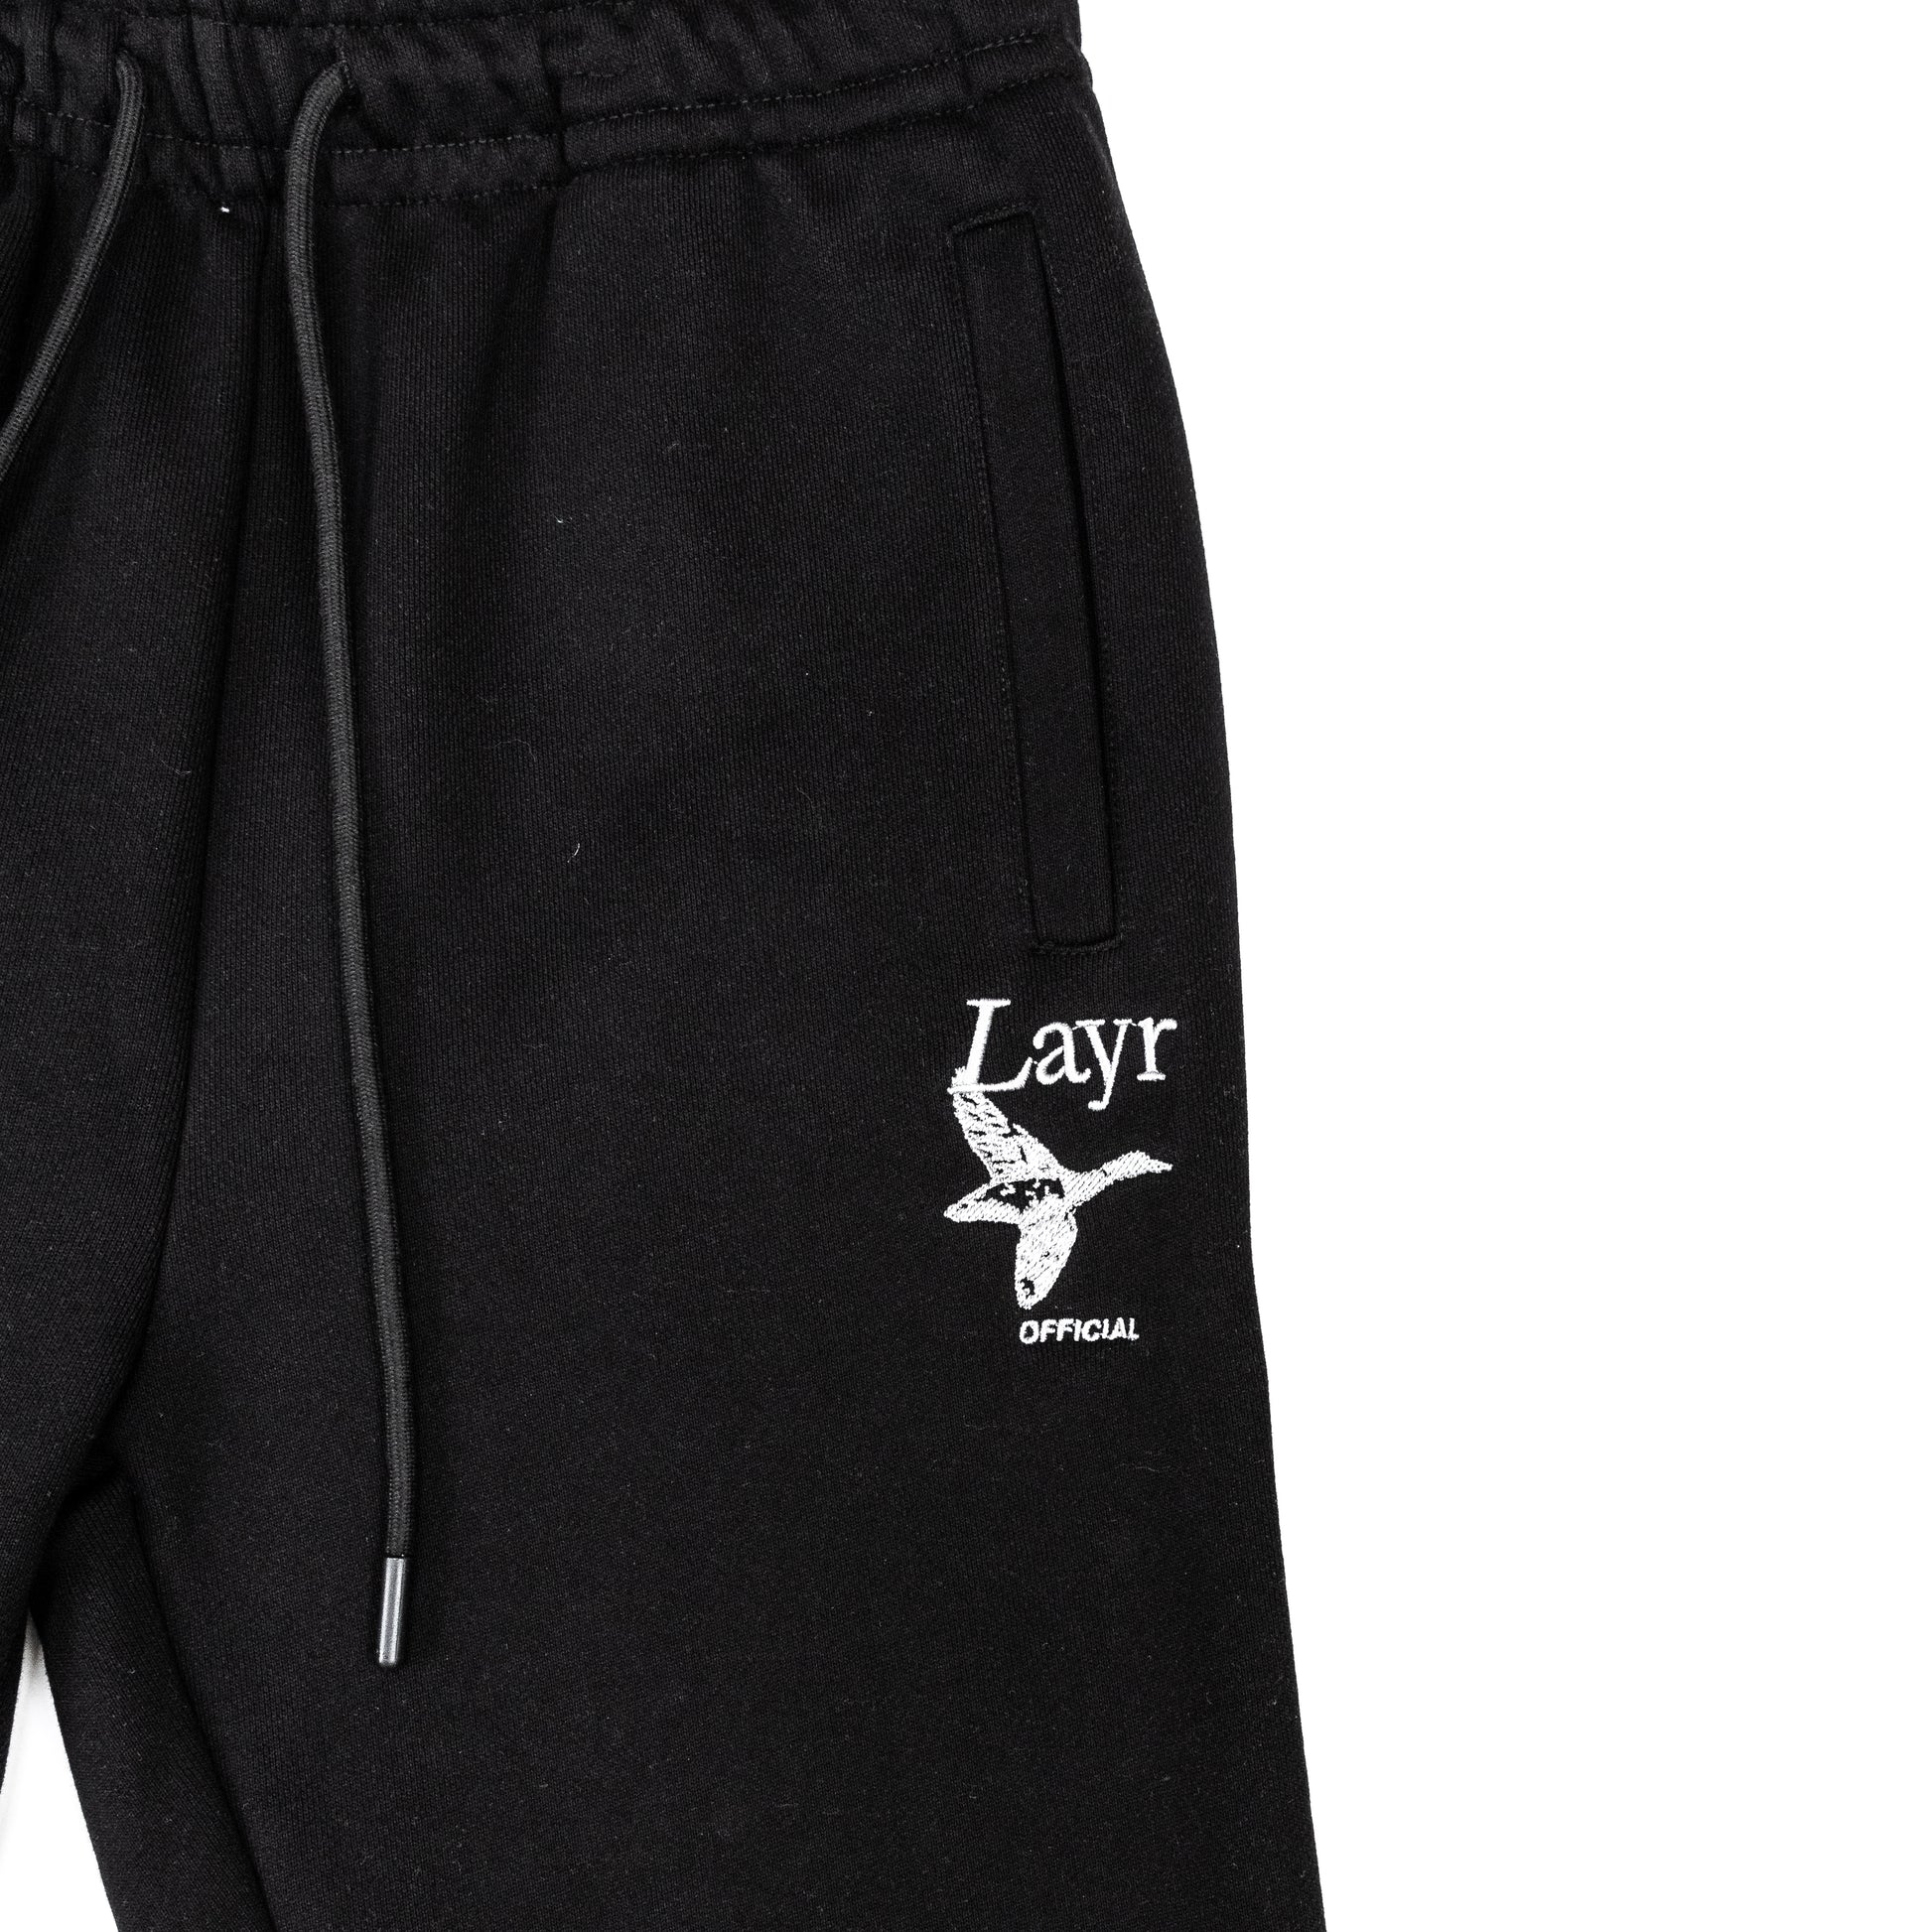 N2M Jogger, Black/Reflective - Layr Official